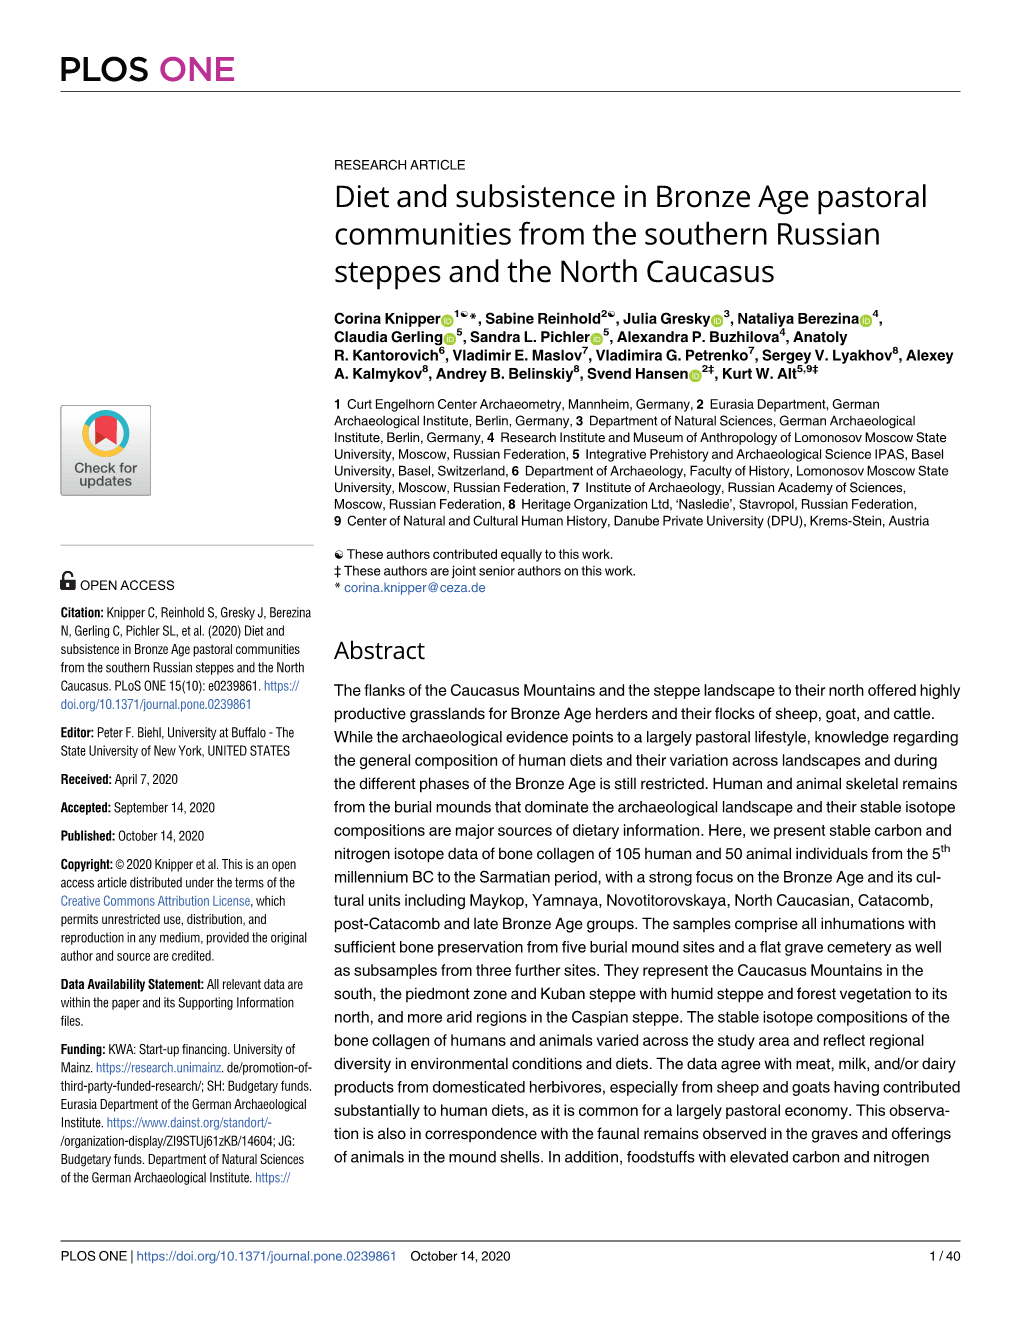 Diet and Subsistence in Bronze Age Pastoral Communities from the Southern Russian Steppes and the North Caucasus